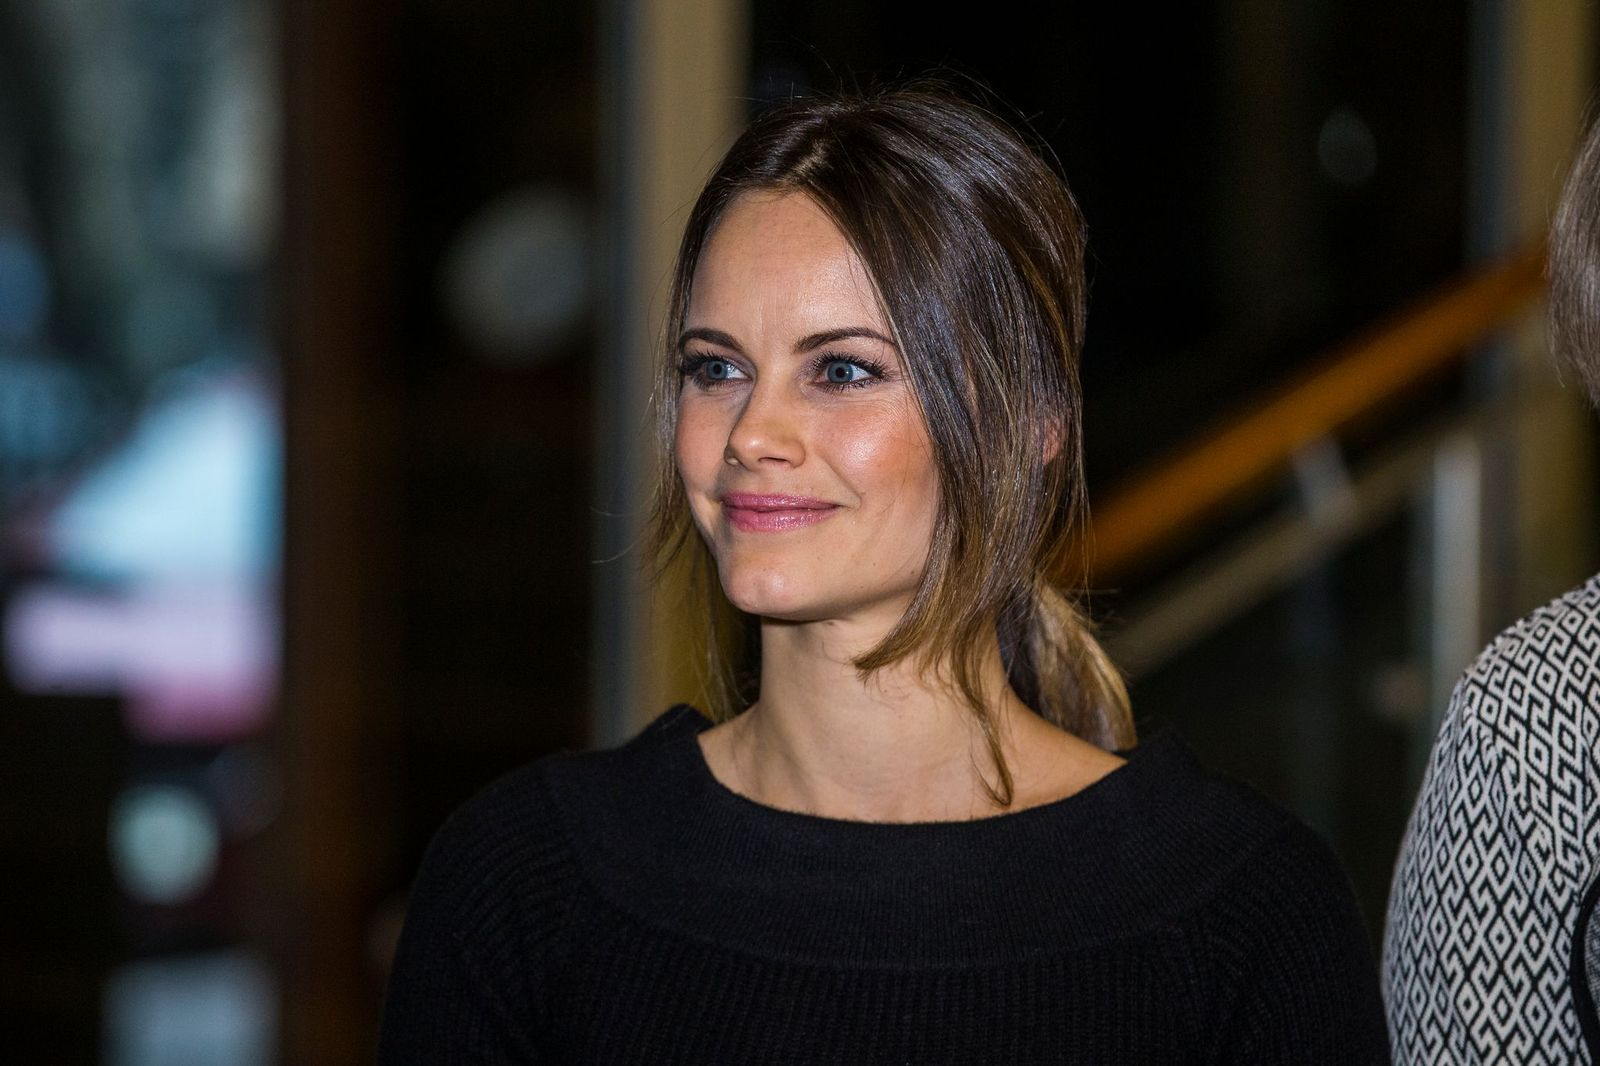 Princess Sofia of Sweden at the Stockholm City Conference Center on November 27, 2019 | Getty Images